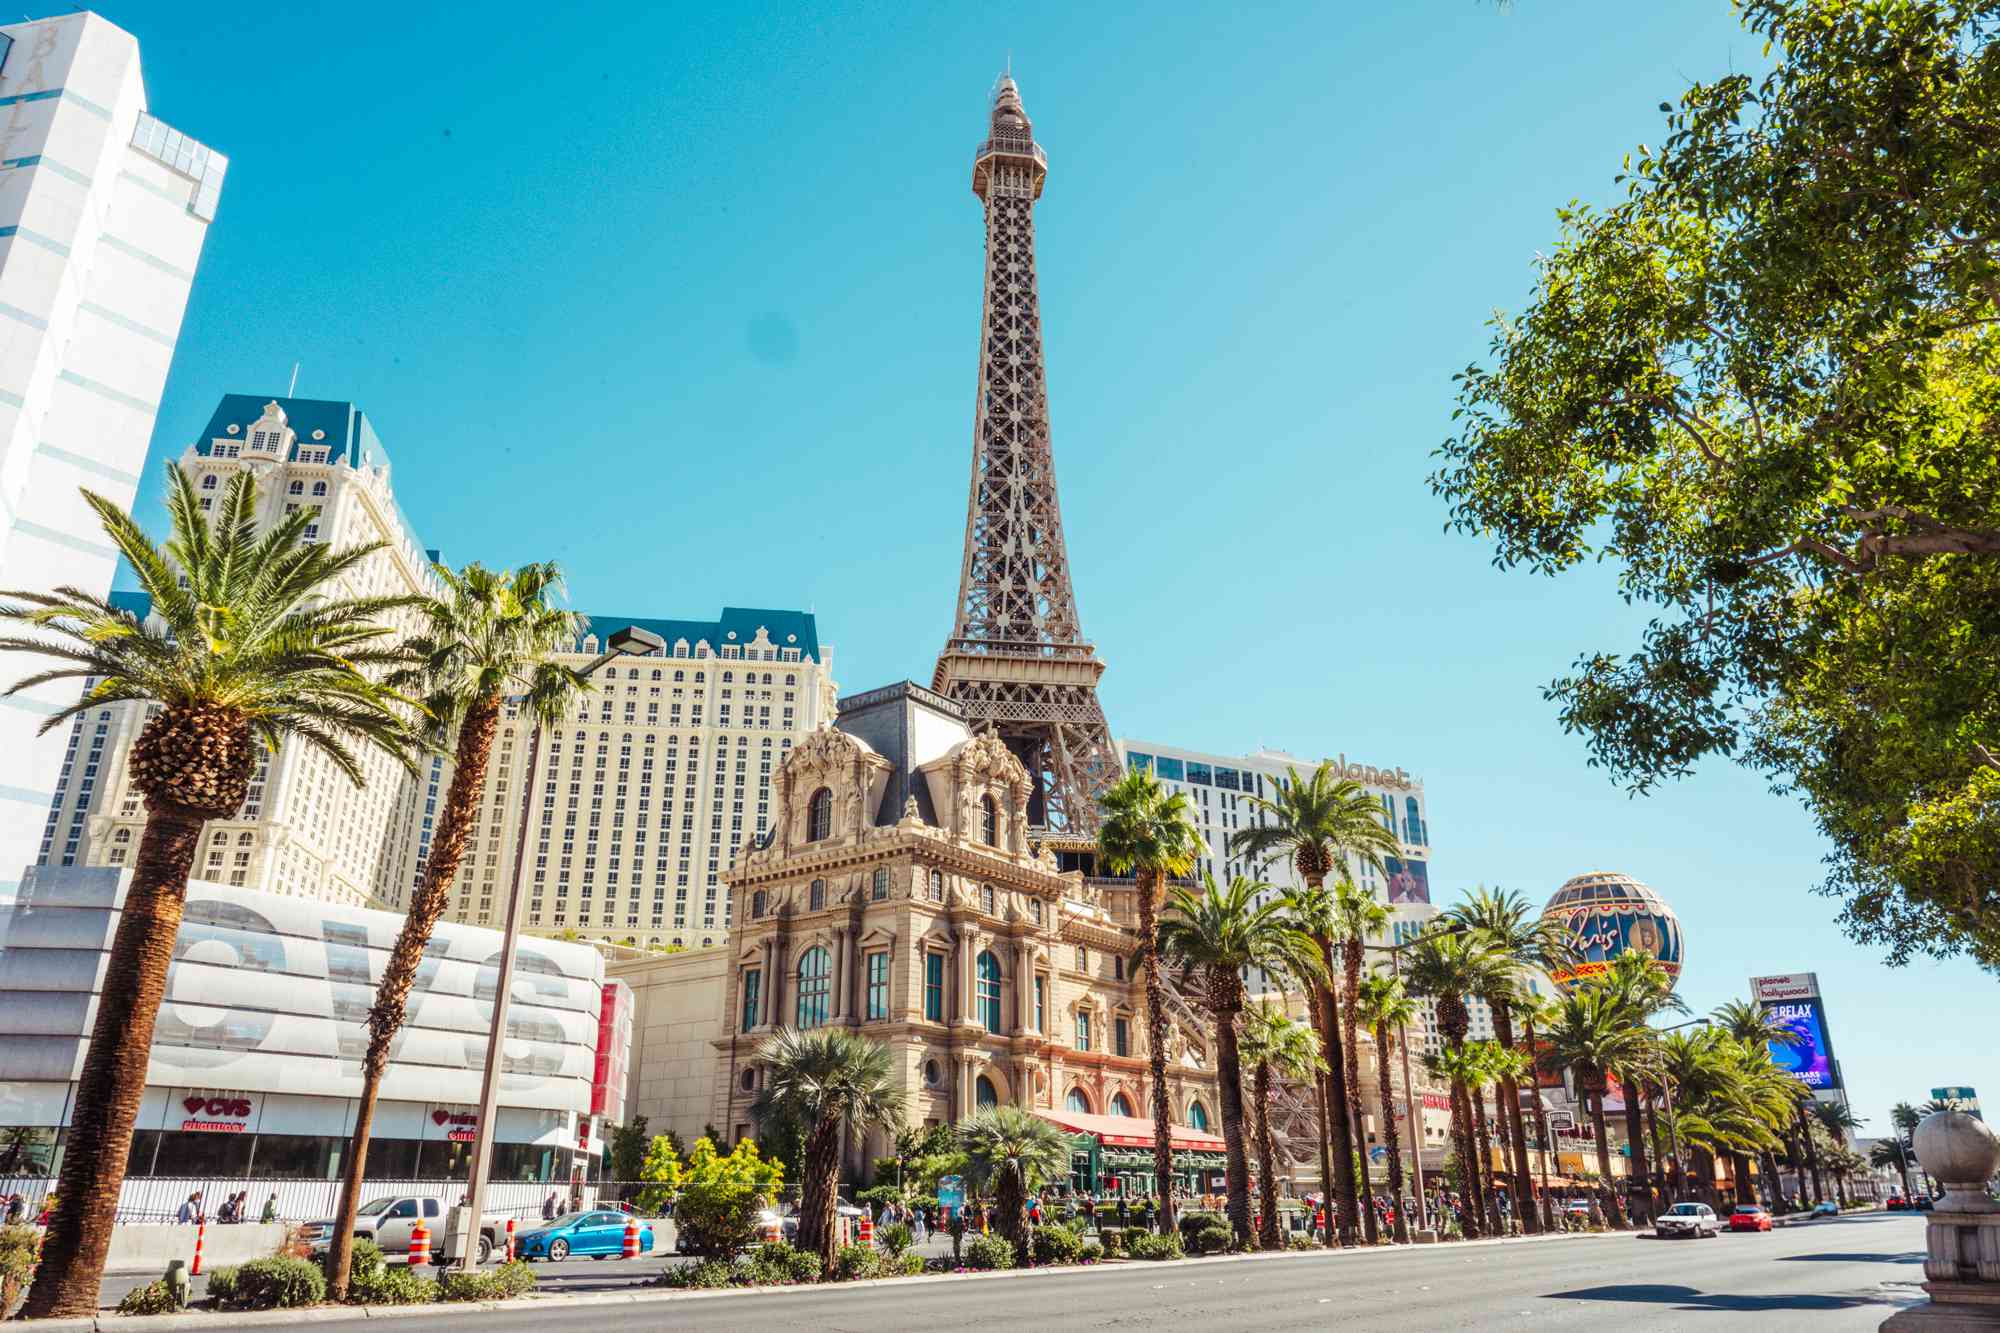 How to Plan a Trip to Las Vegas on a Budget, According to a Travel Expert